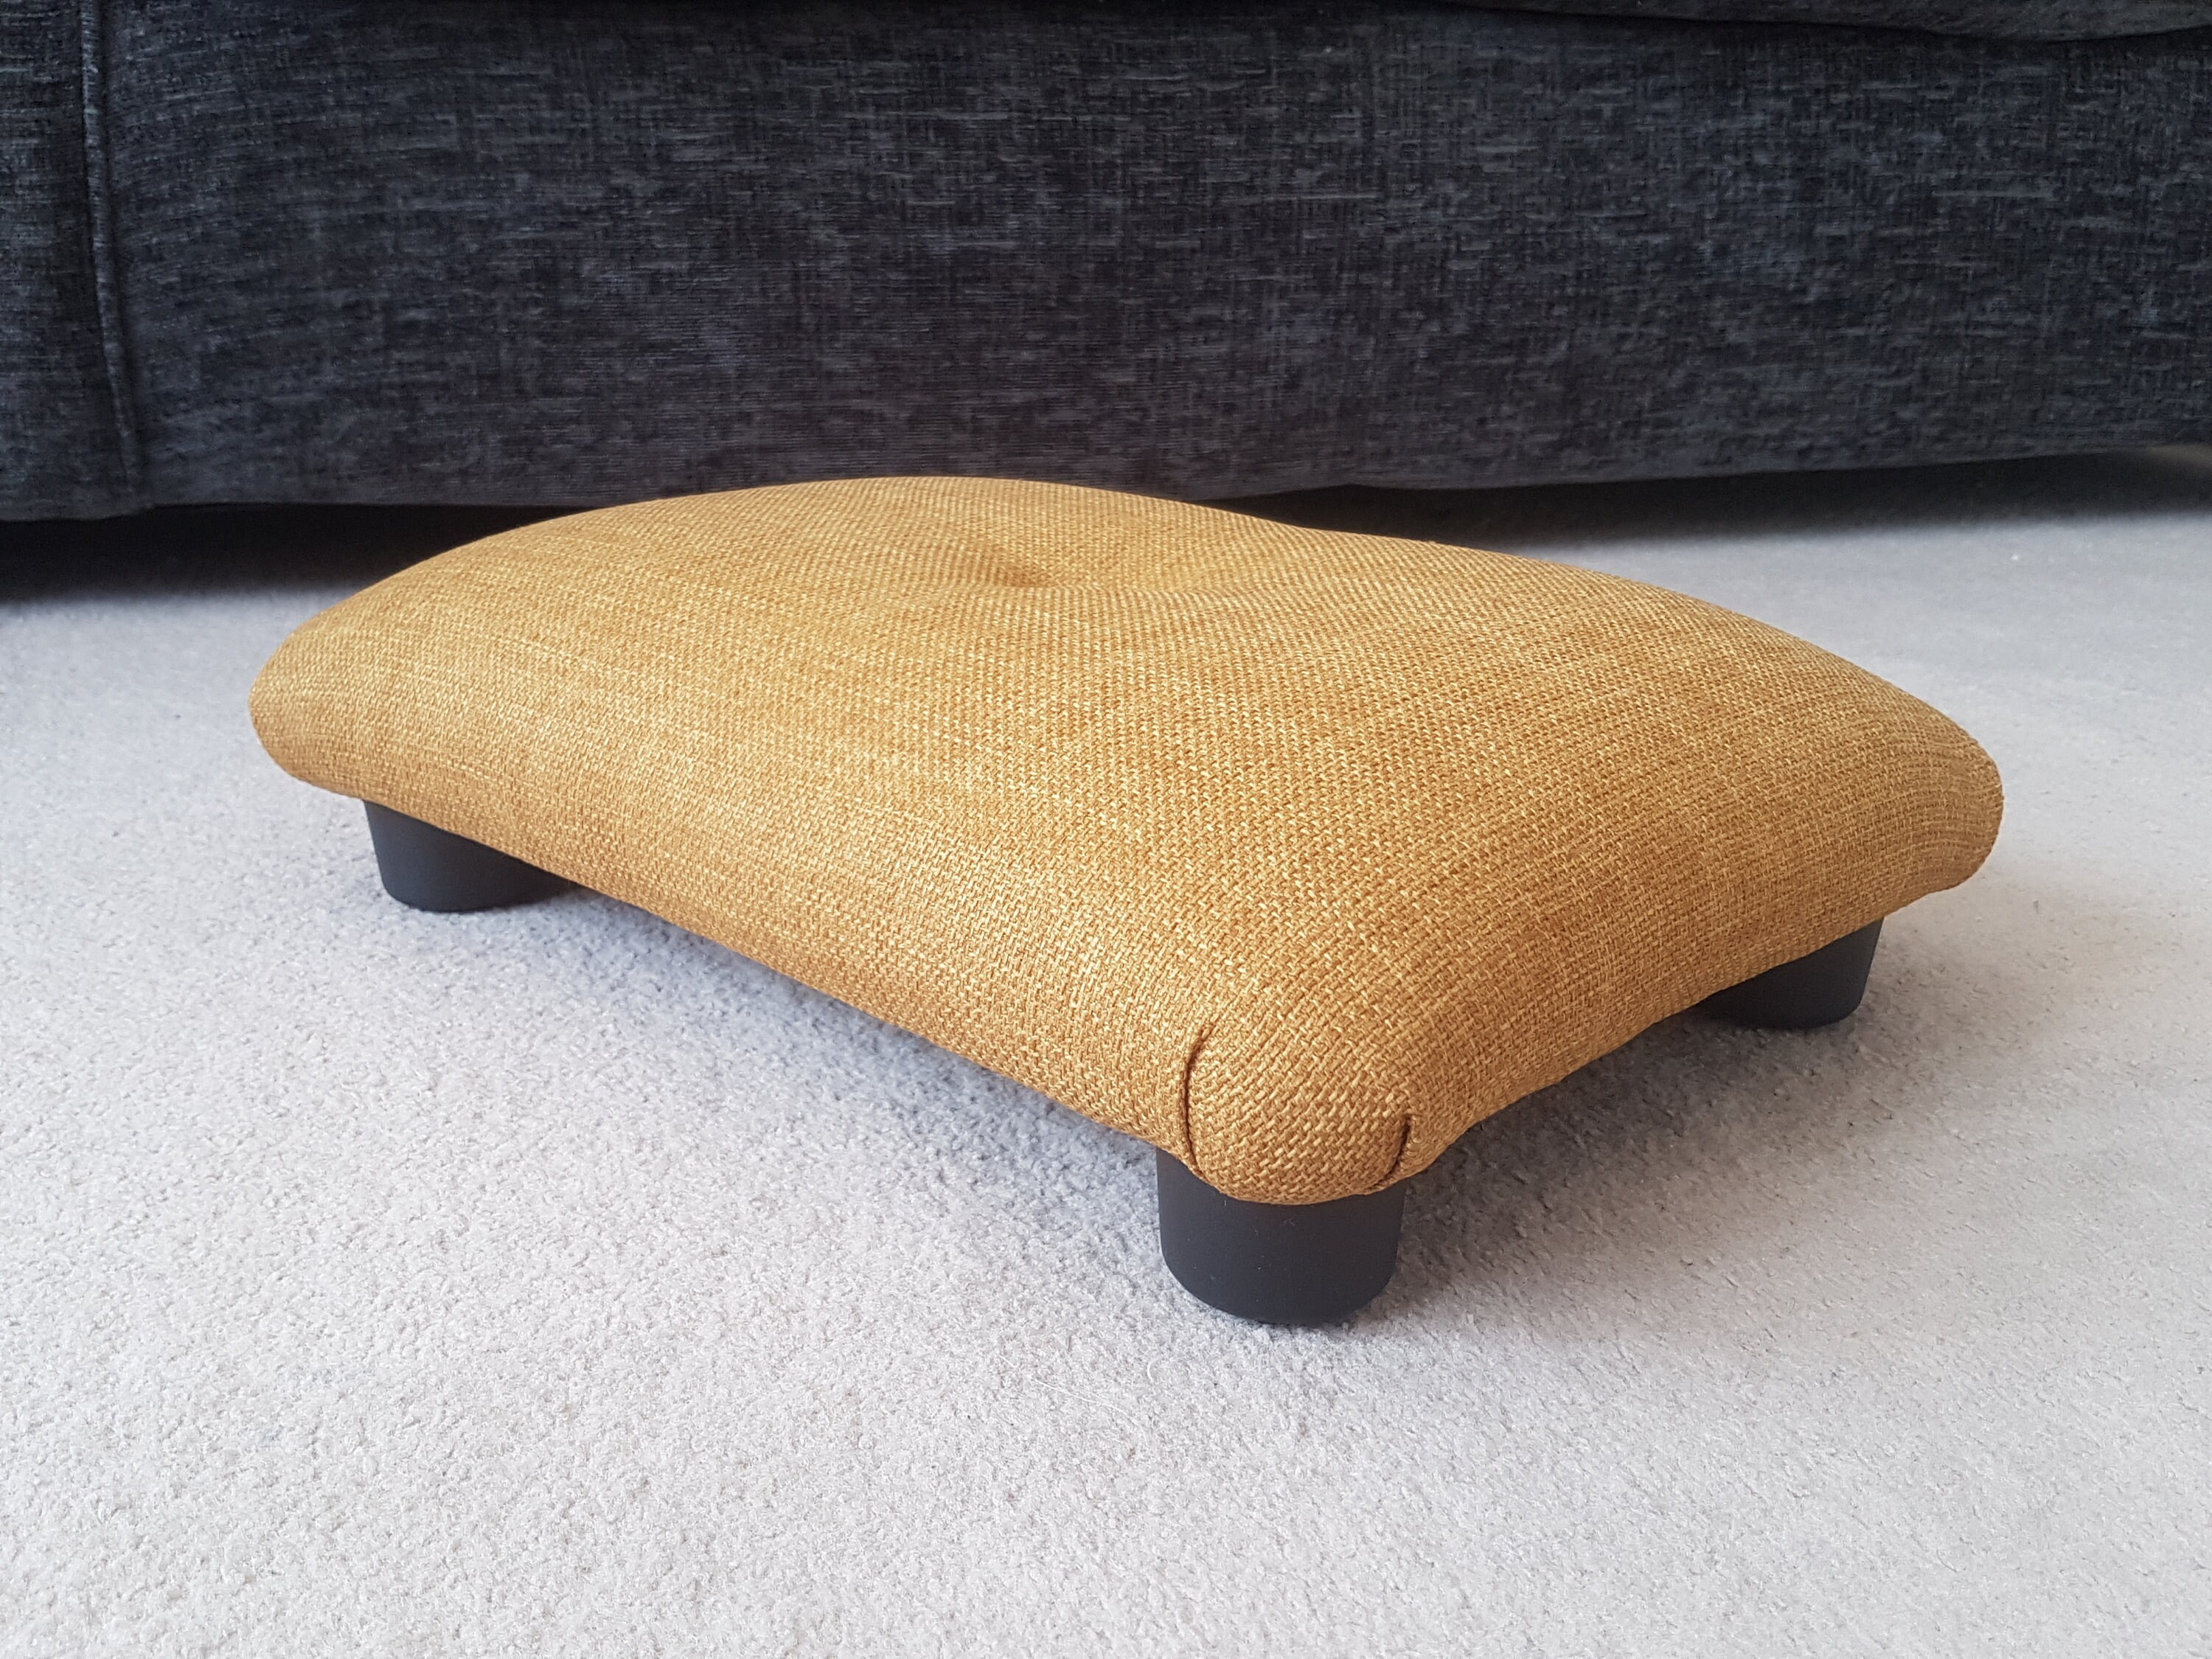 NEW Under Desk Low 10 Cm 4 Footstool With Plastic Feet and Button